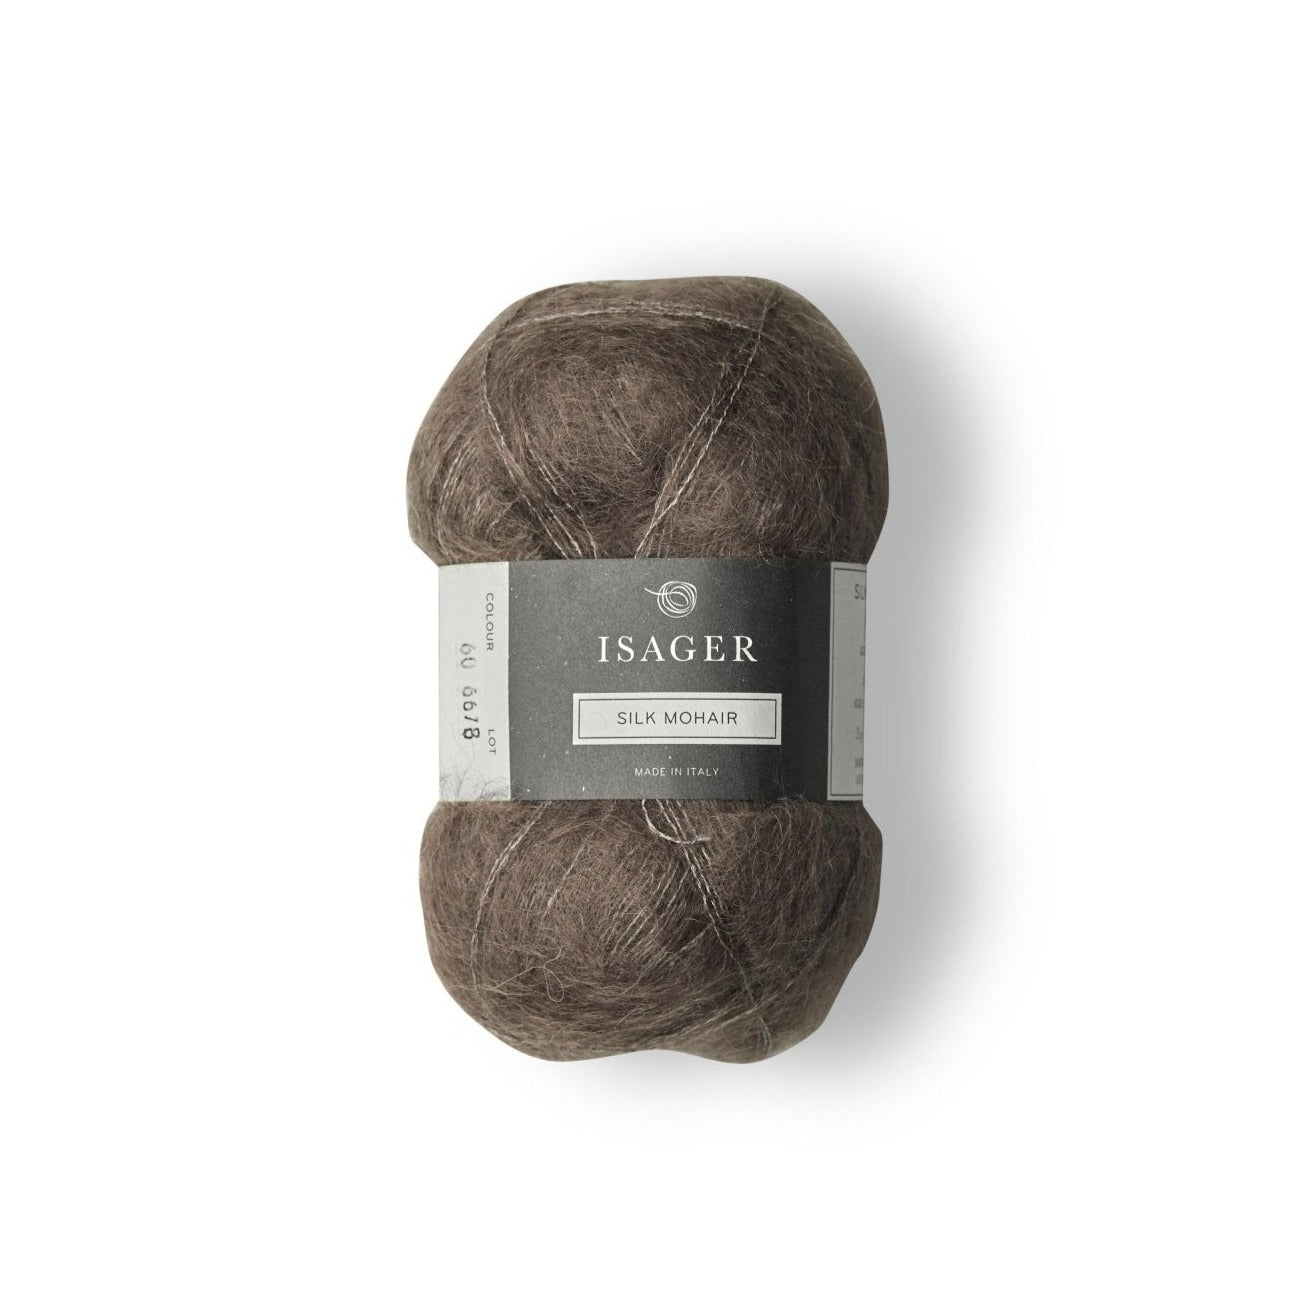 Isager Silk Mohair - 60 - 2 Ply - Isager - The Little Yarn Store